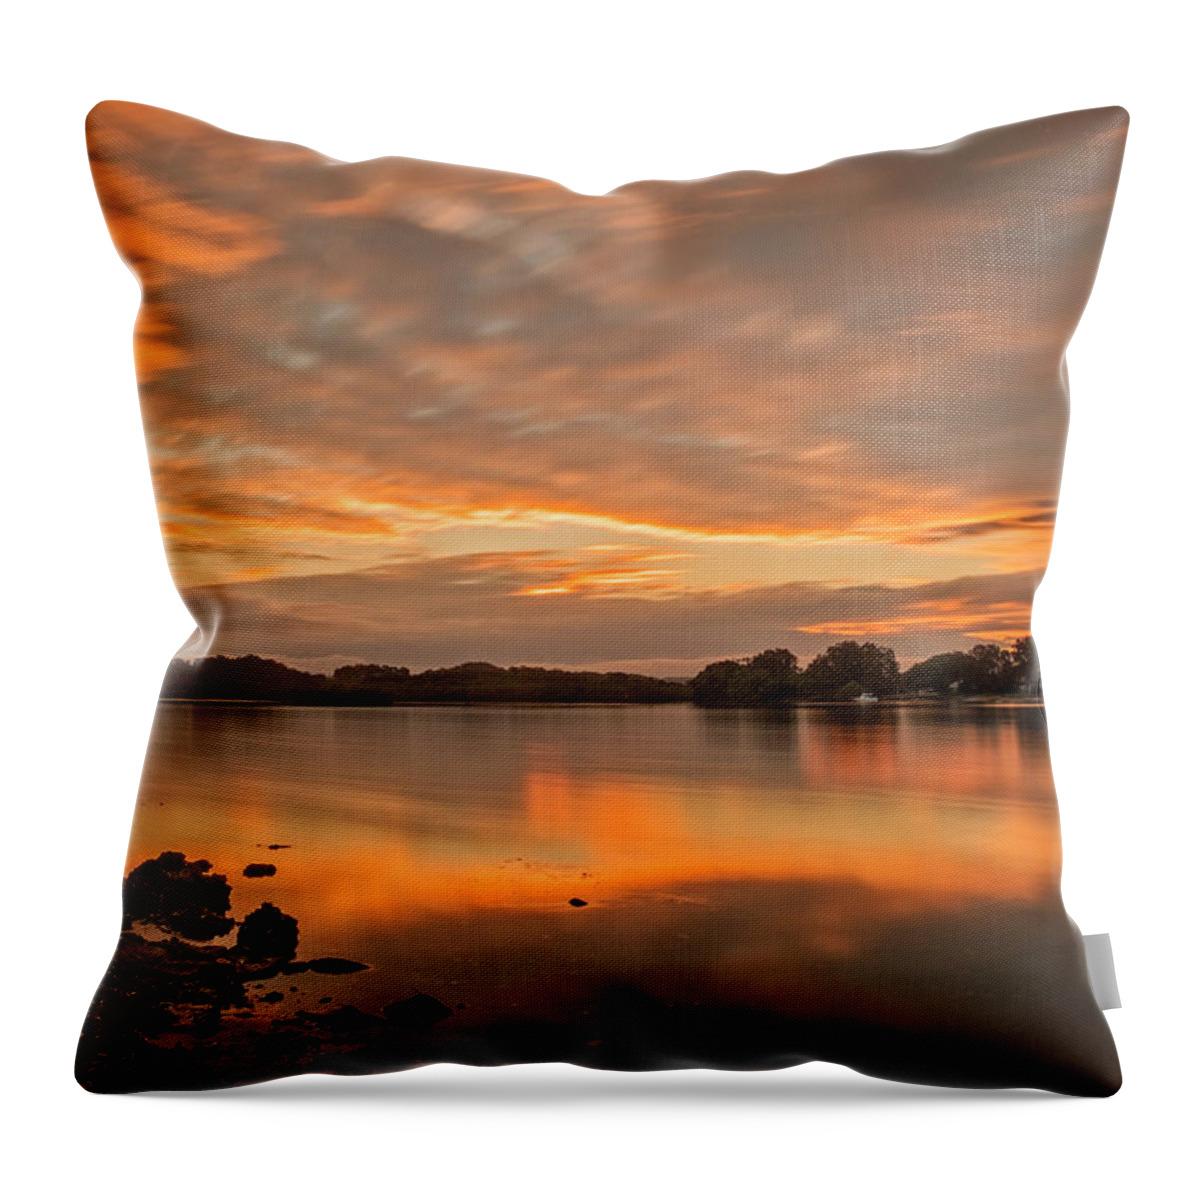 River Throw Pillow featuring the photograph Take Me To The River by Catherine Reading